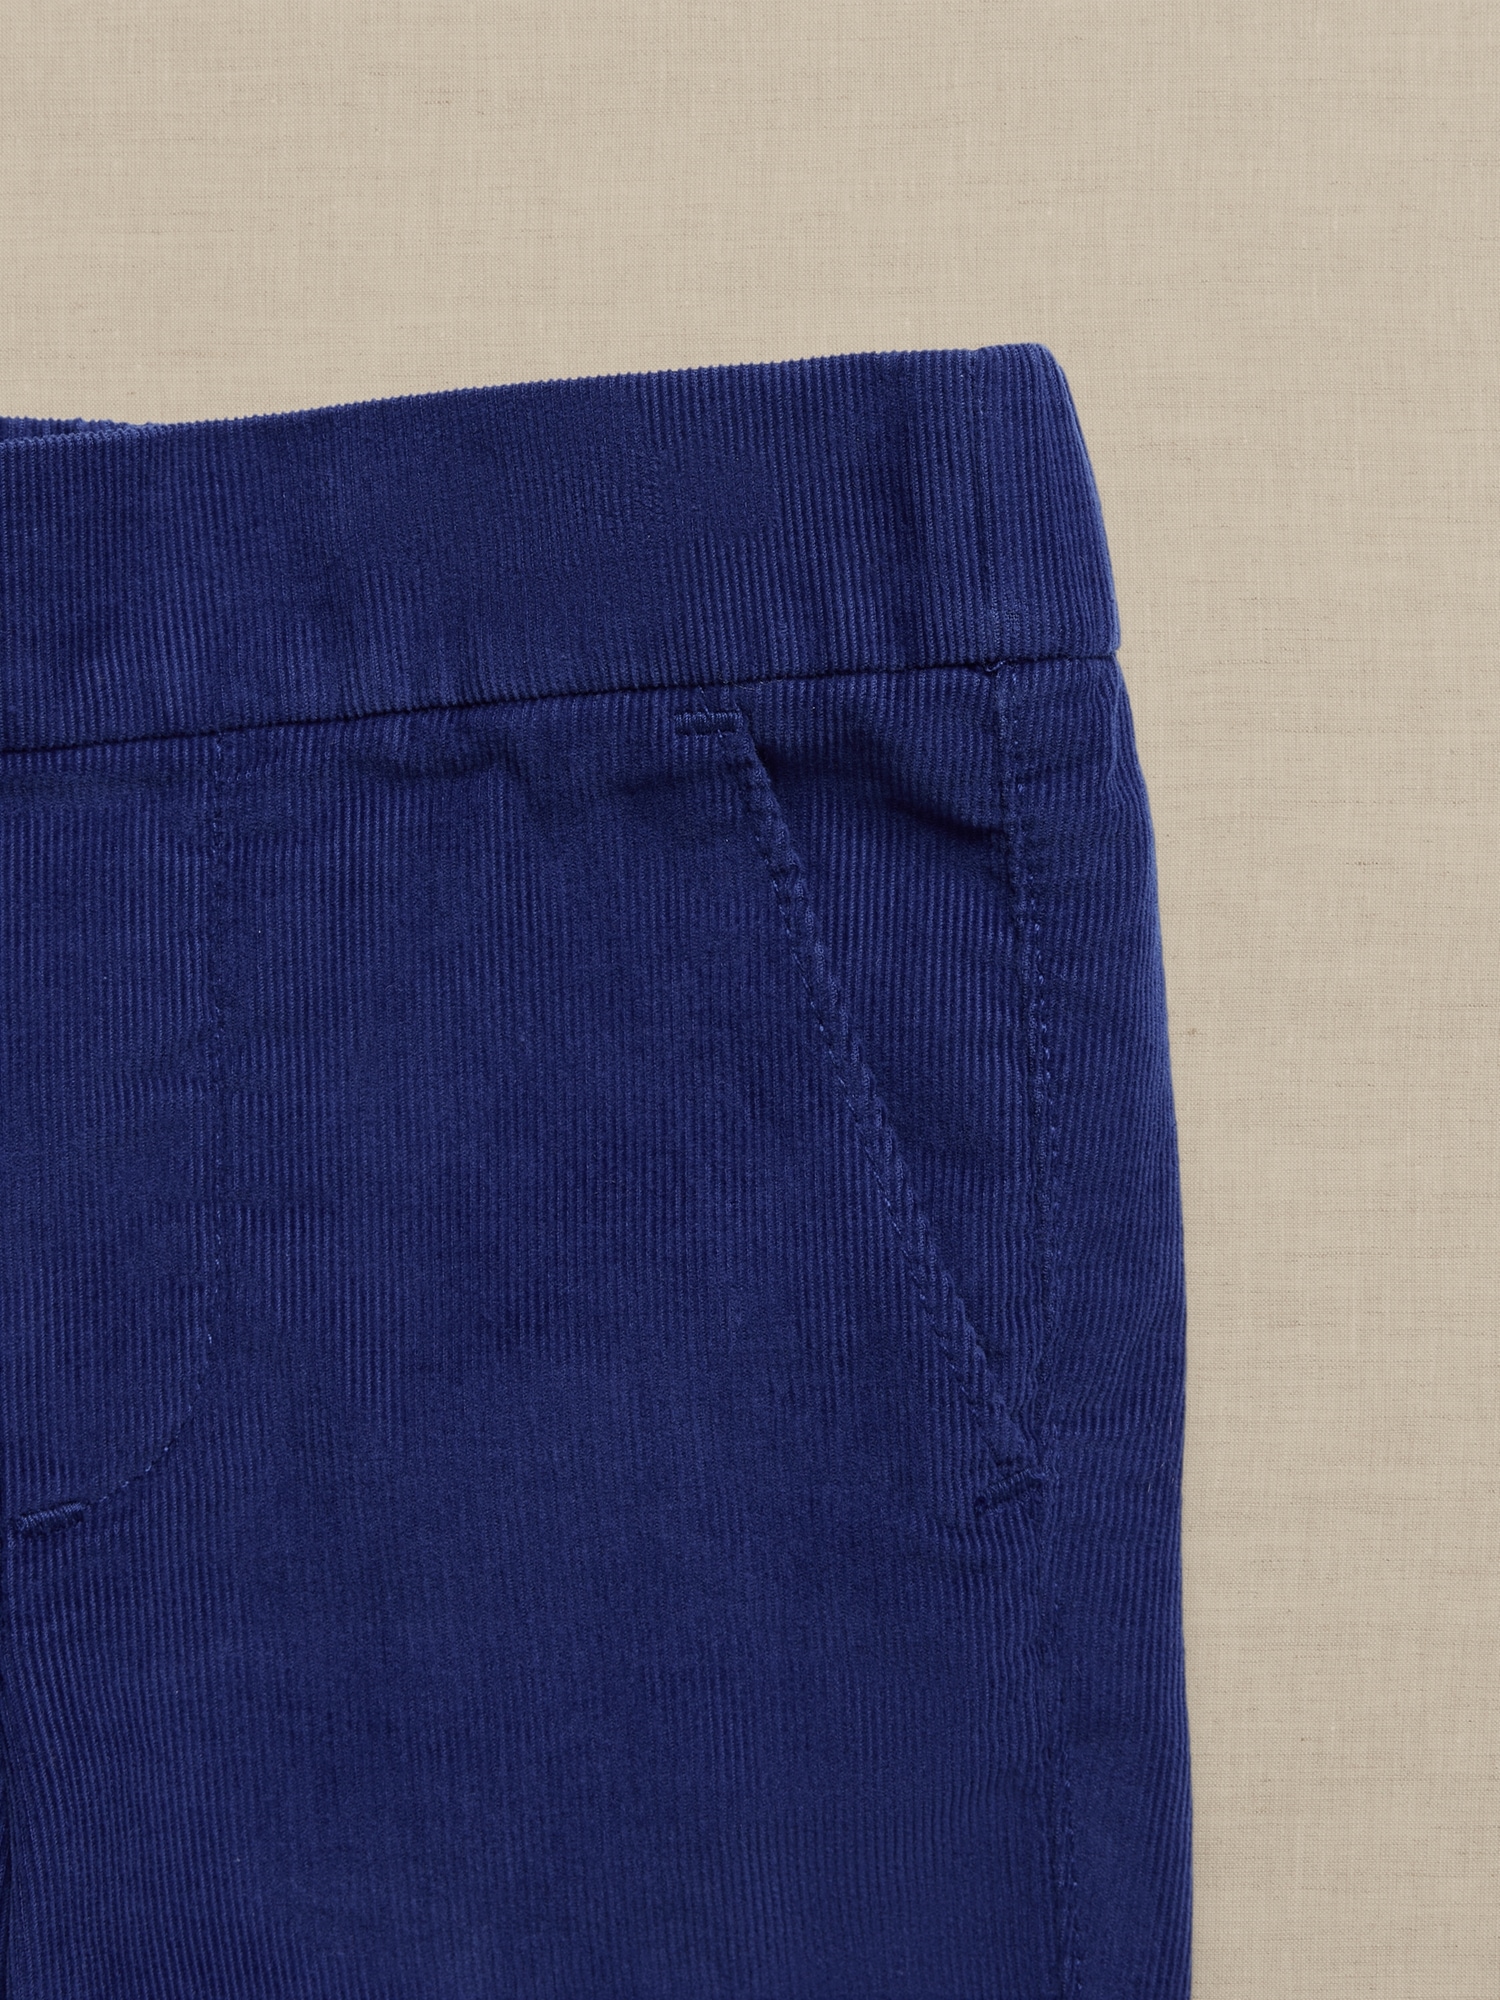 The Flare Corduroy Pant for Baby + Toddler